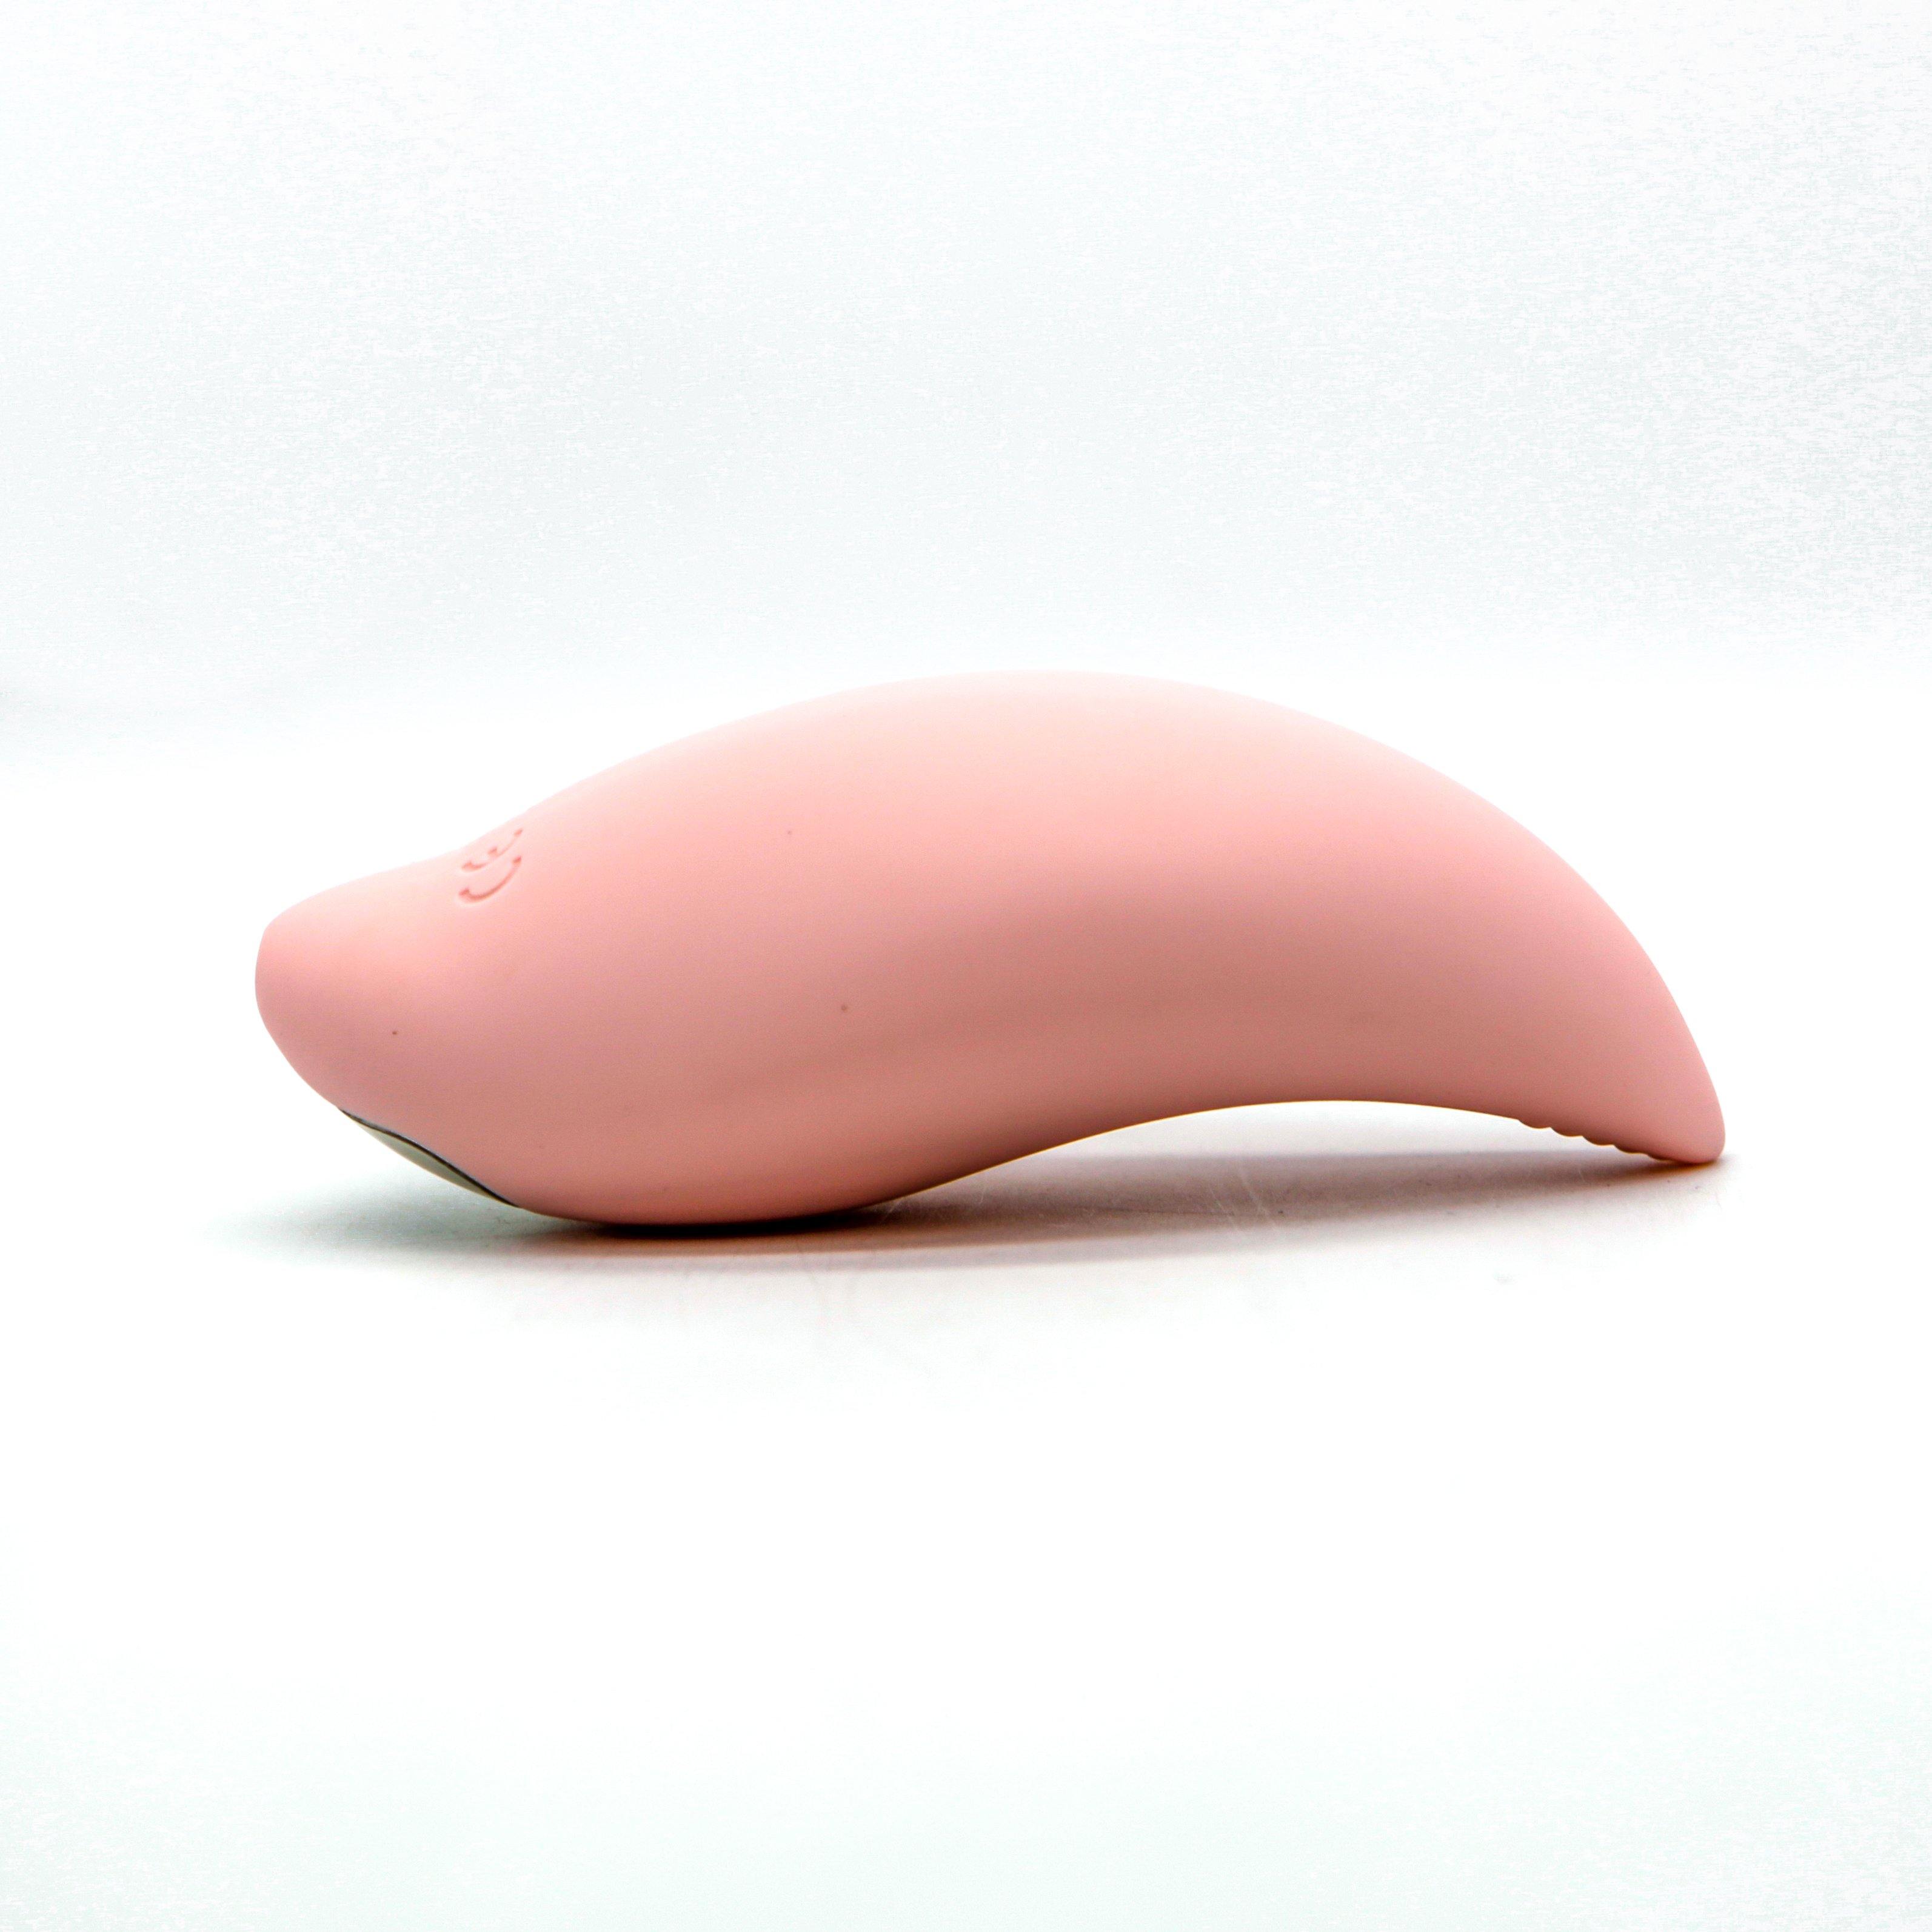 Lumama Lactation Massager for clogged milk ducts